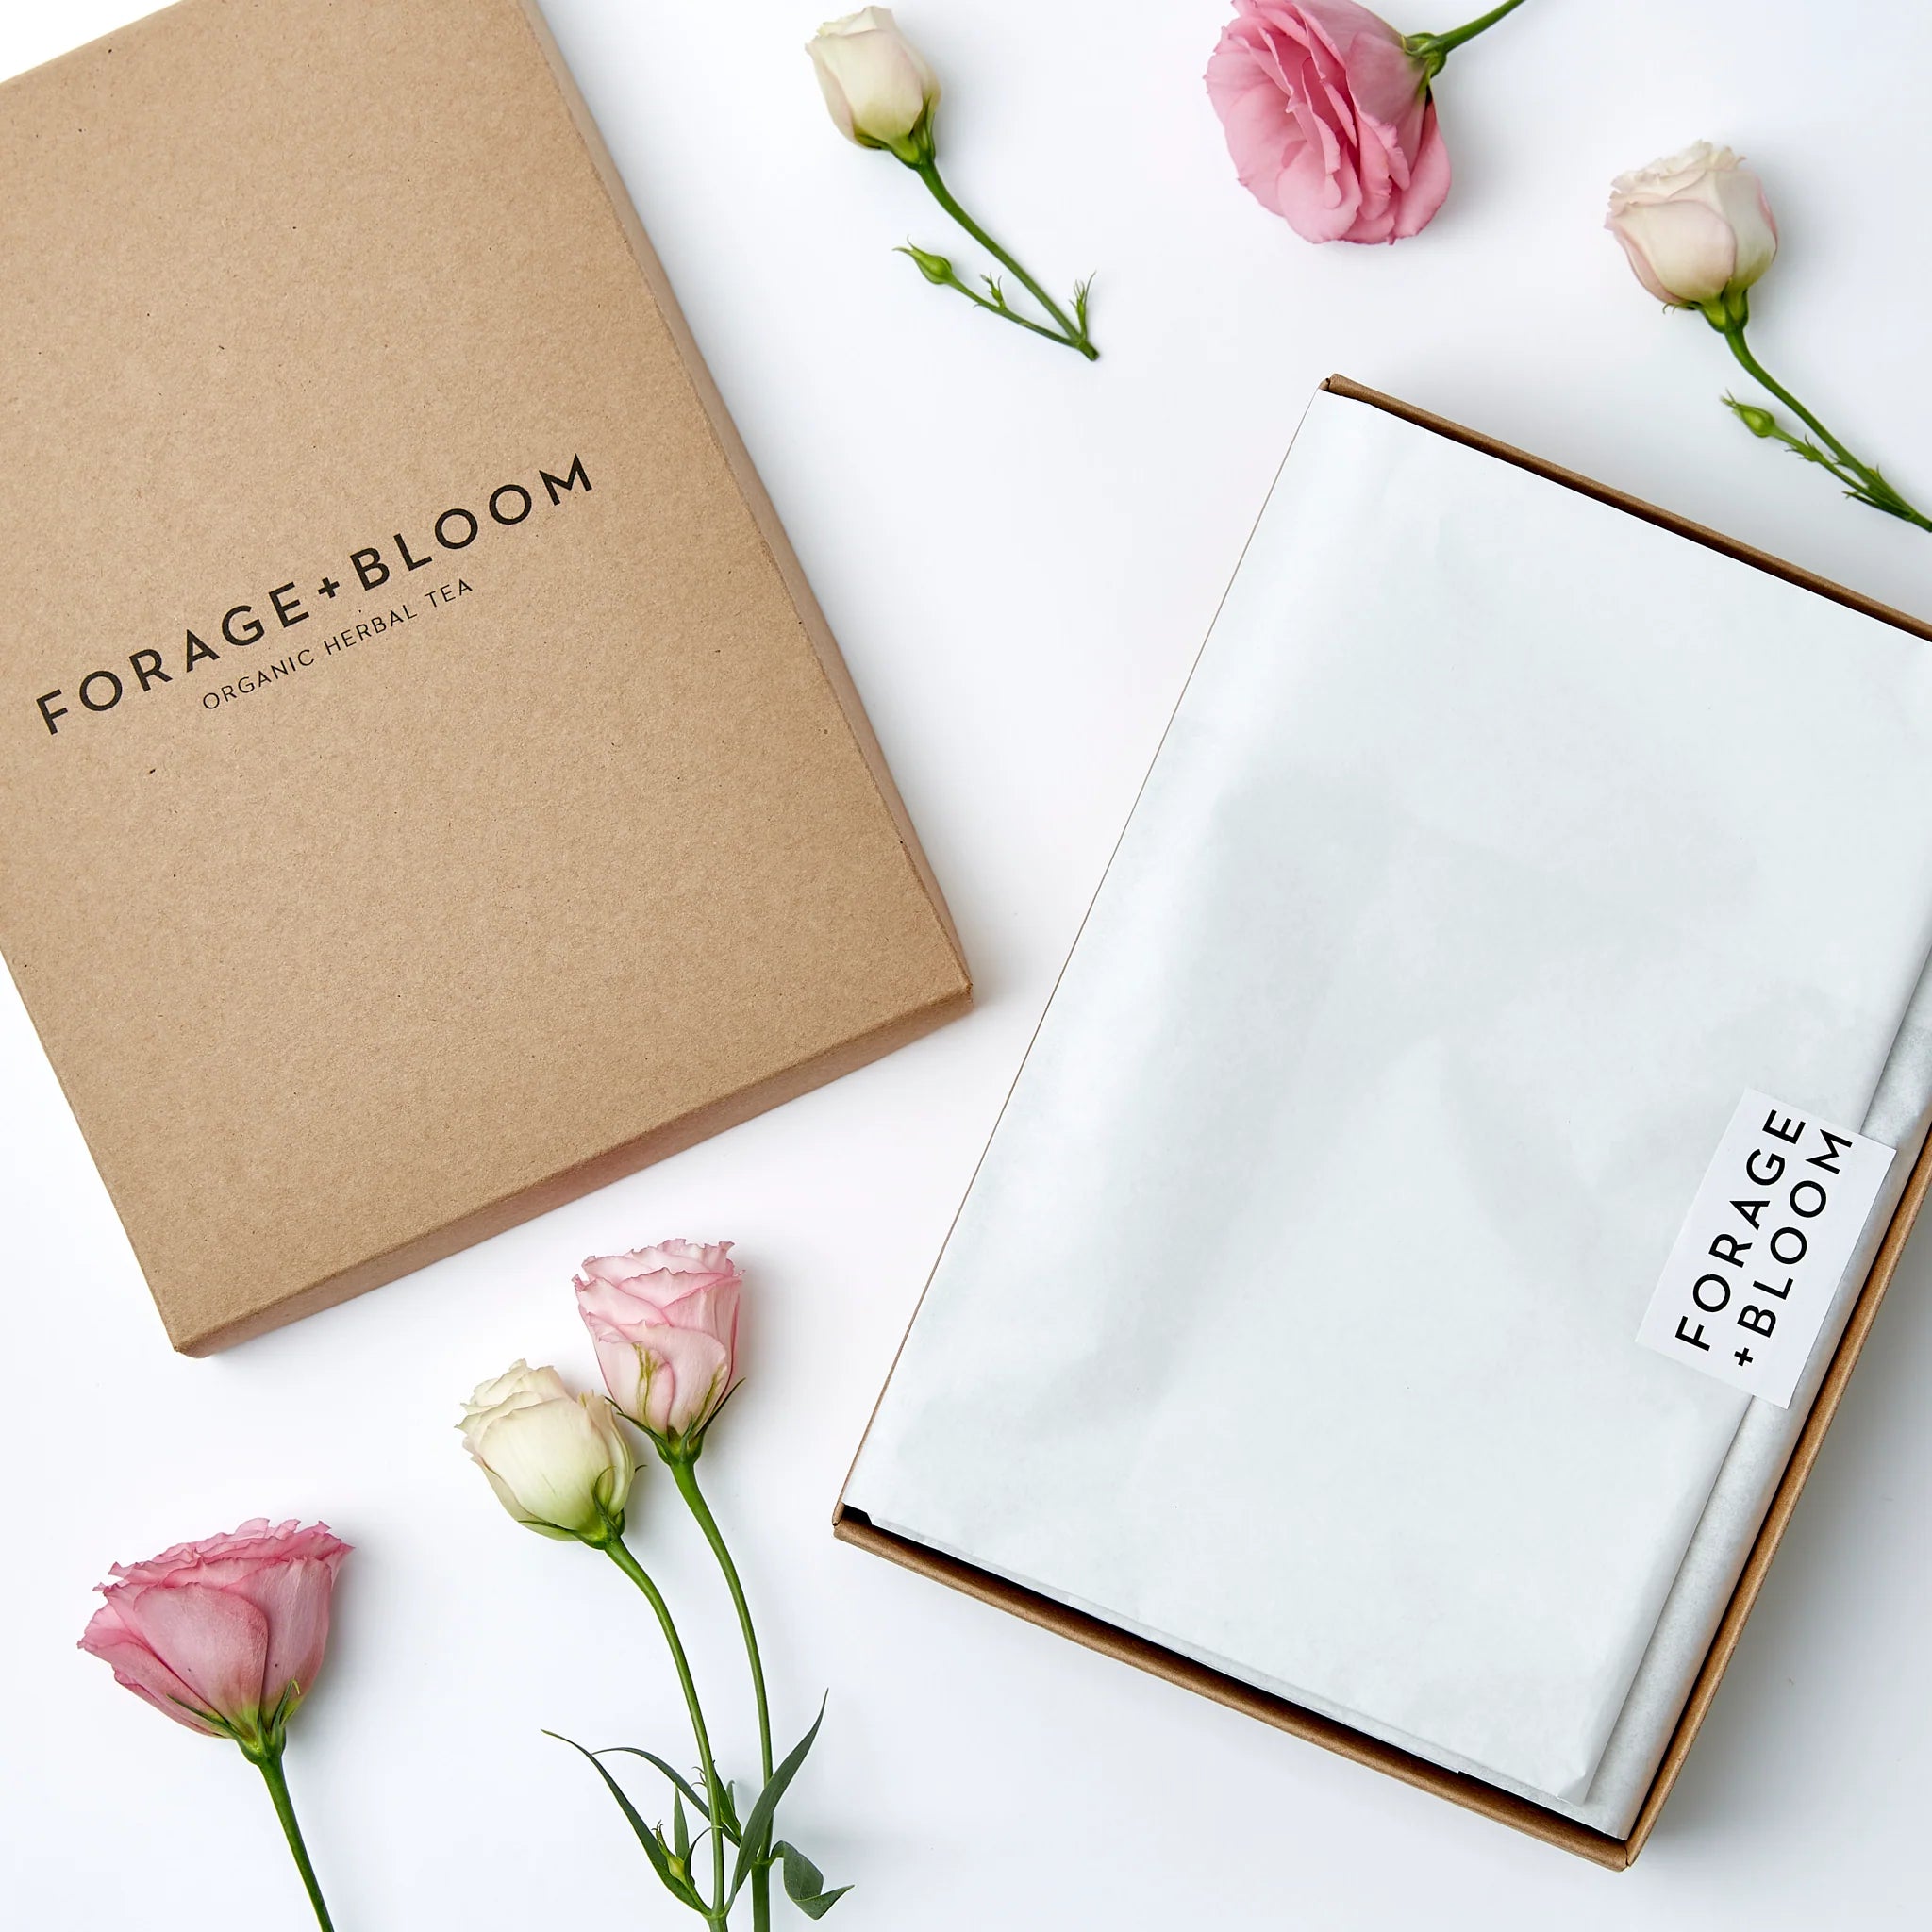 Sentence with product and brand name: Elegant Tea Testing Box Set by Forage + Bloom packaging with a touch of nature: forage + bloom herbal tea blends nestled among delicate pink roses on a clean, white background.